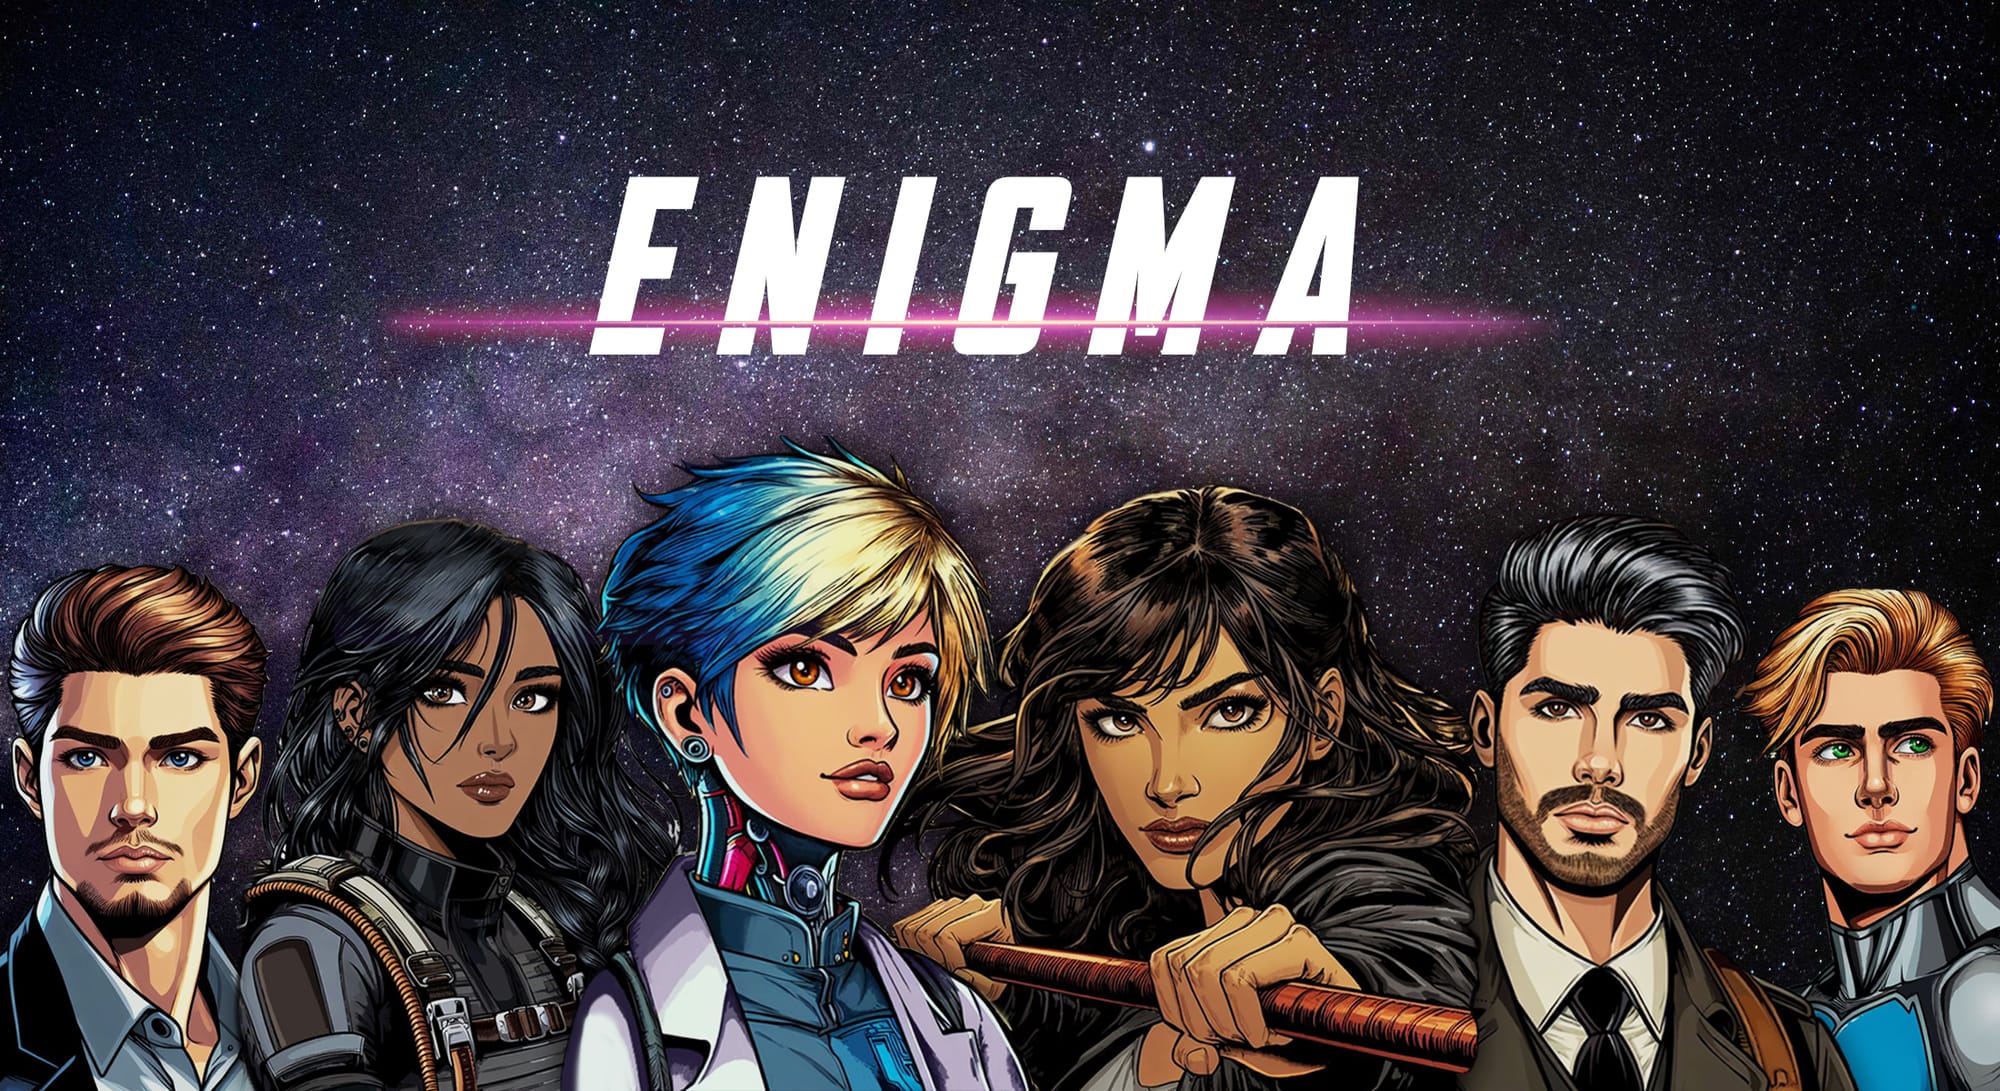 "Enigma" against a star background, with 6 cartoon characters in the fore.